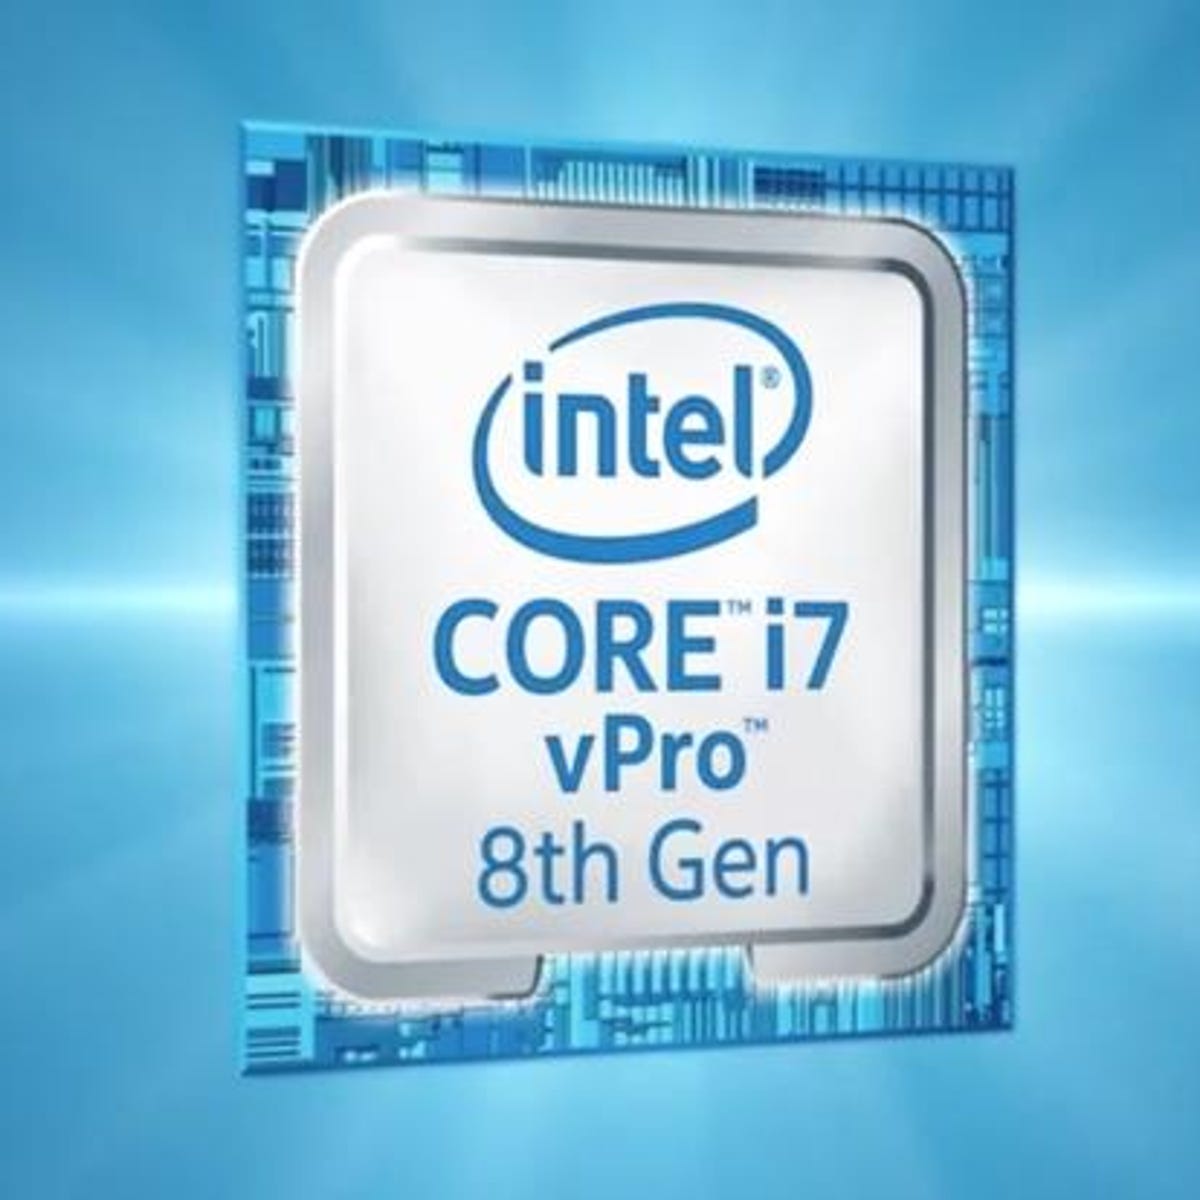 Intel new Core vPro mobile processors with enhanced security and Wi-Fi support | ZDNET